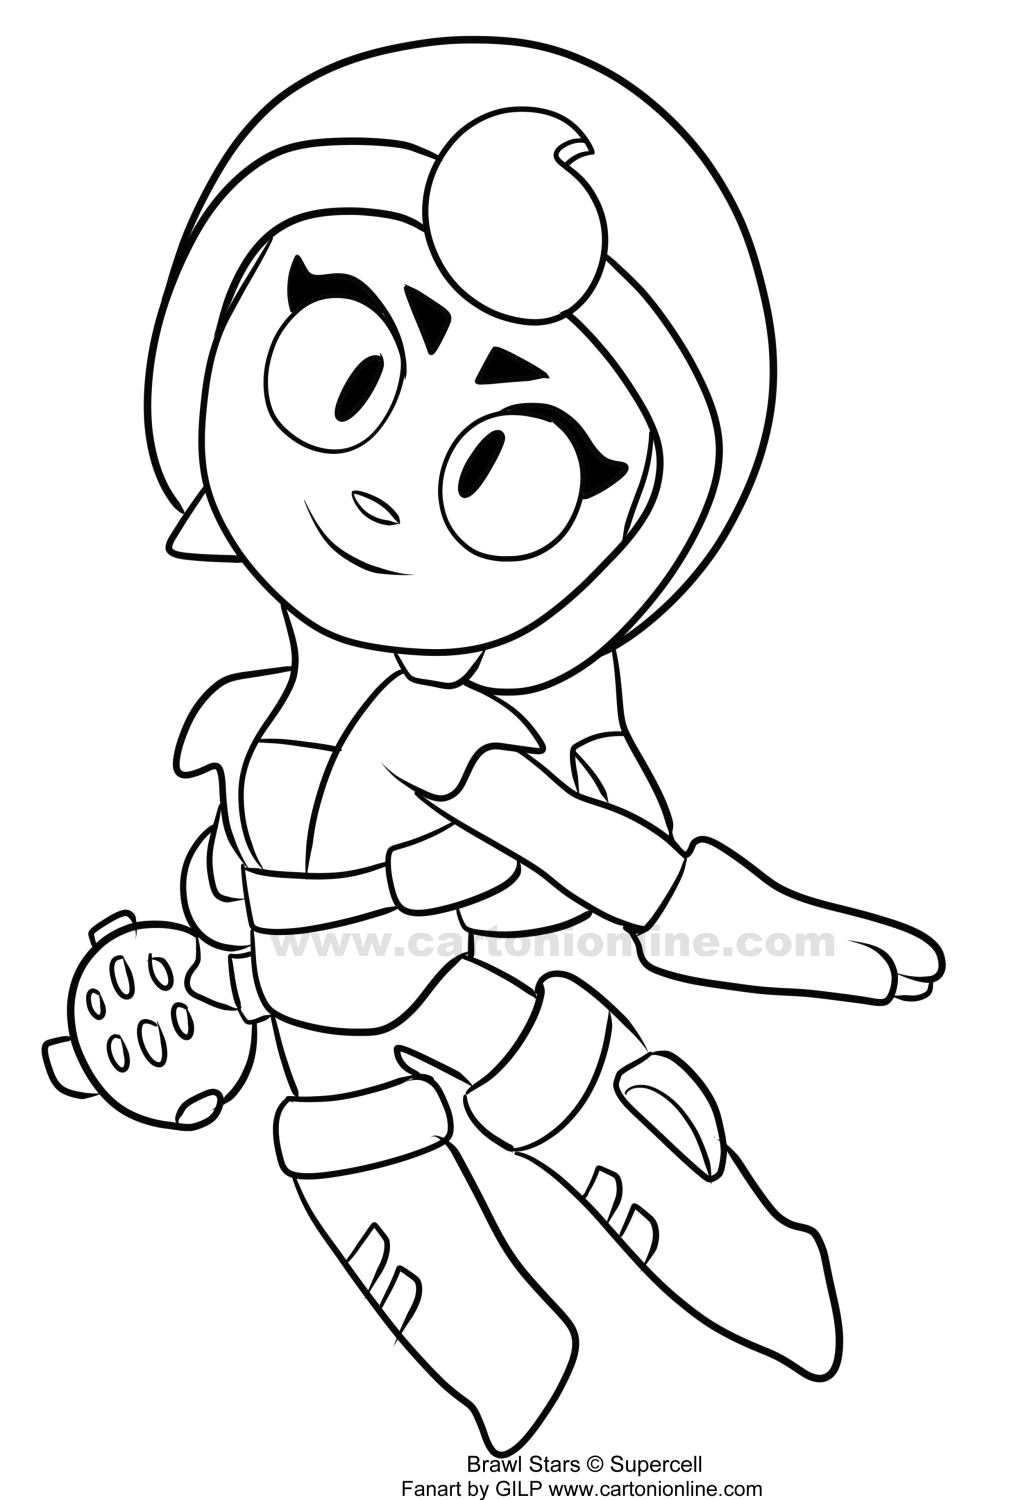 Janet 04 from Brawl Stars coloring page to print and coloring